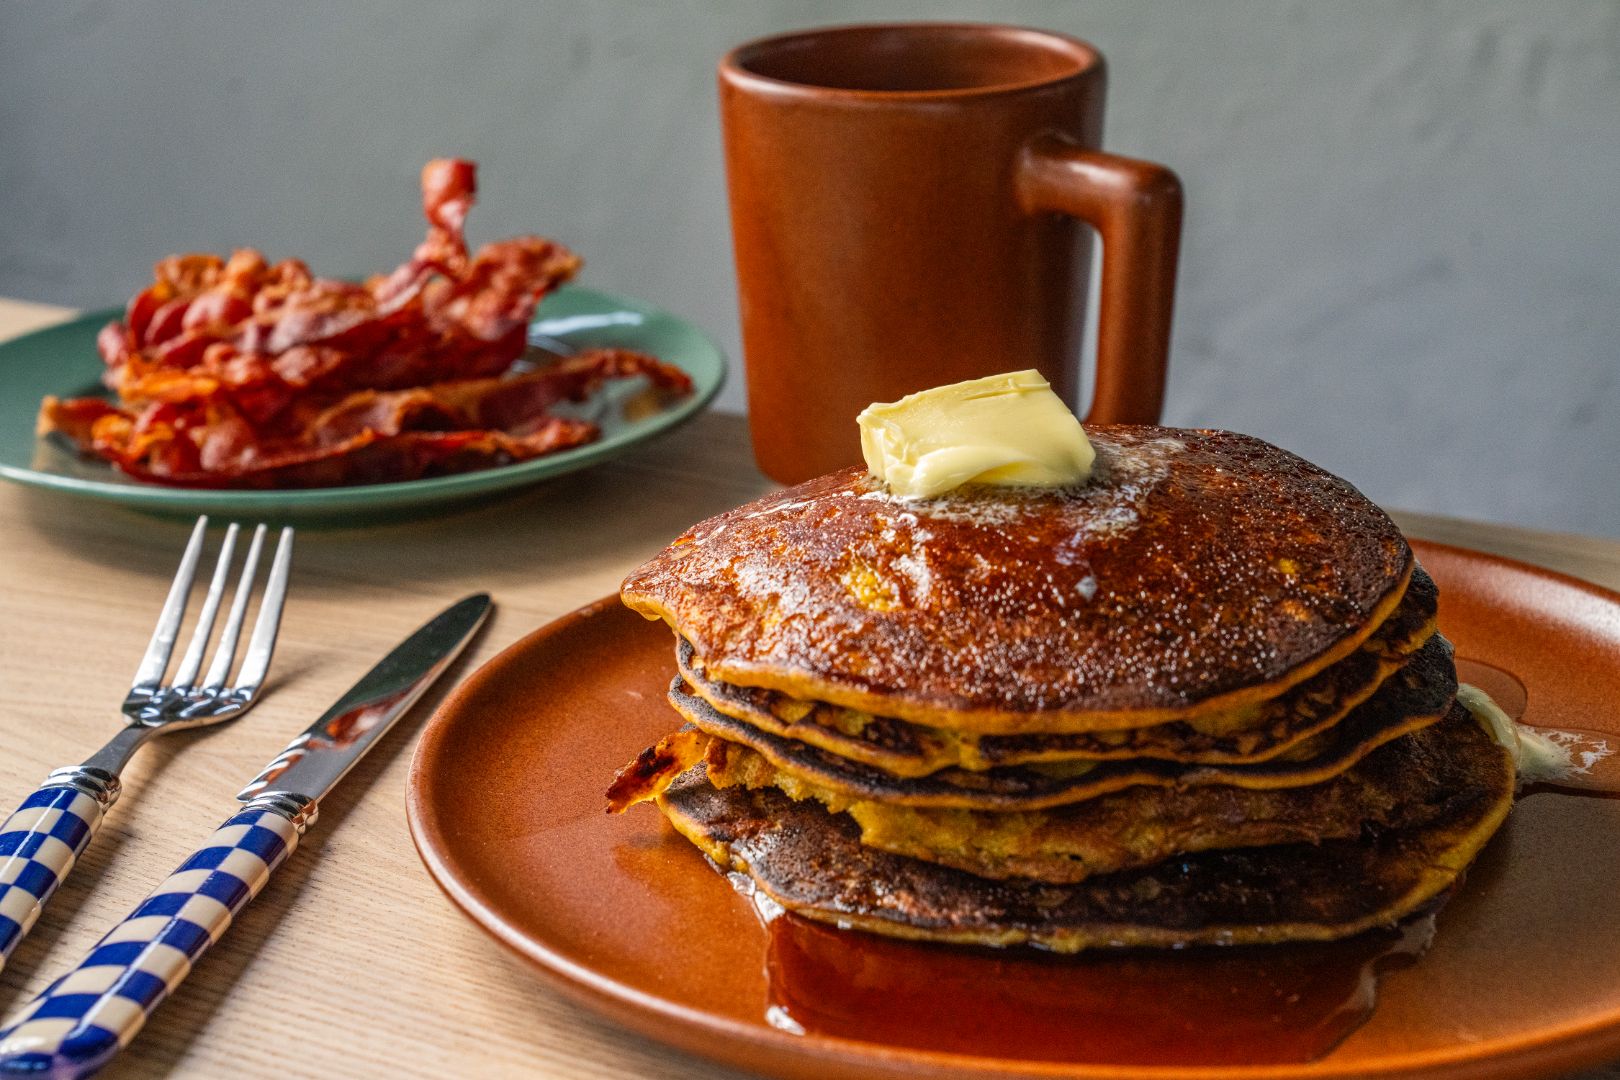 Plate of pancakes with a side of bacon and coffee